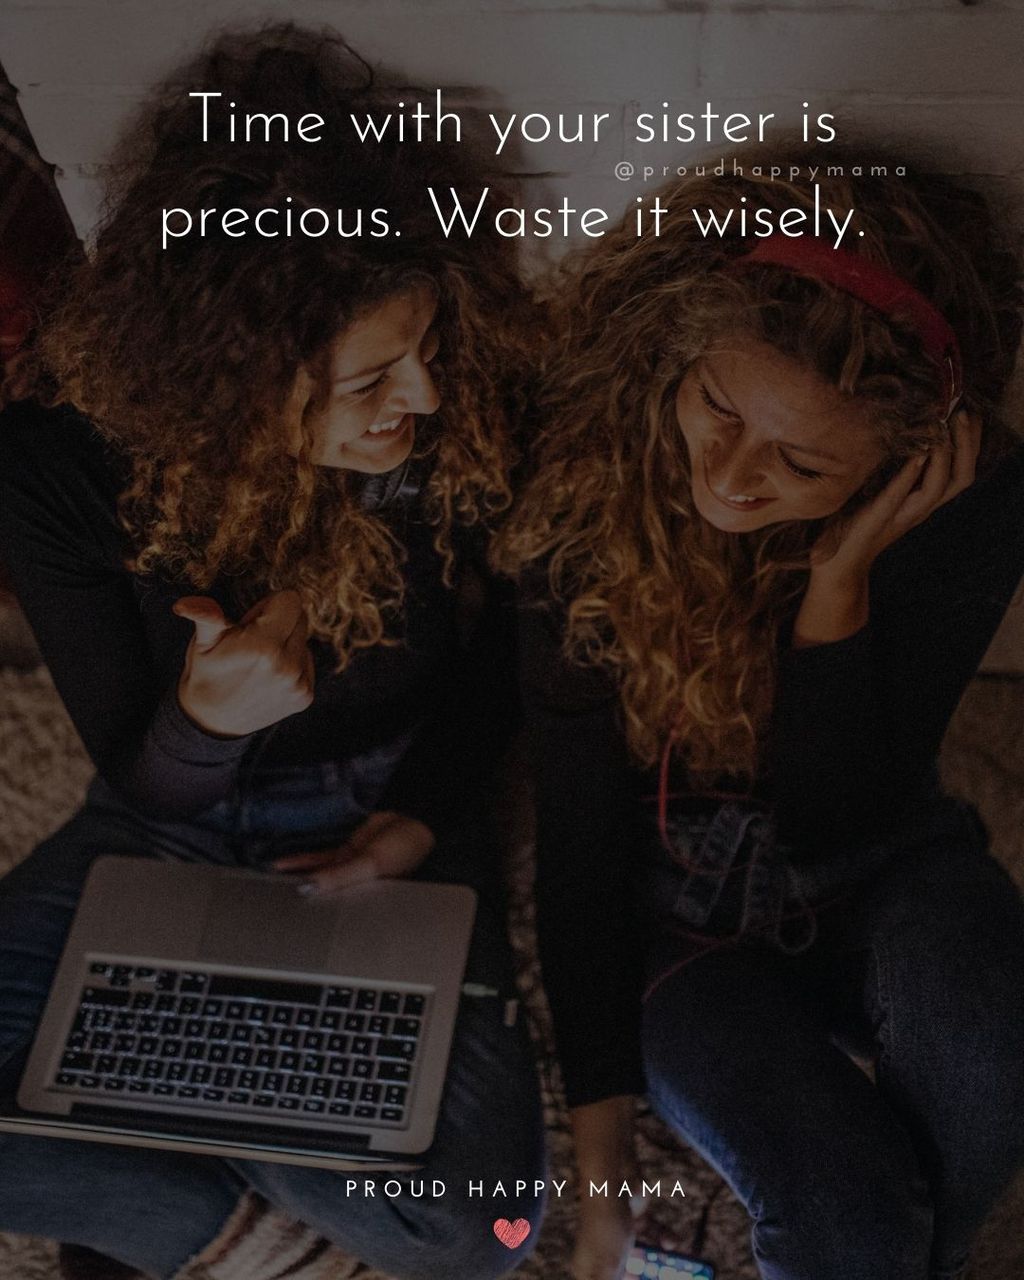 Sister Quotes - Time with your sister is precious. Waste it wisely.